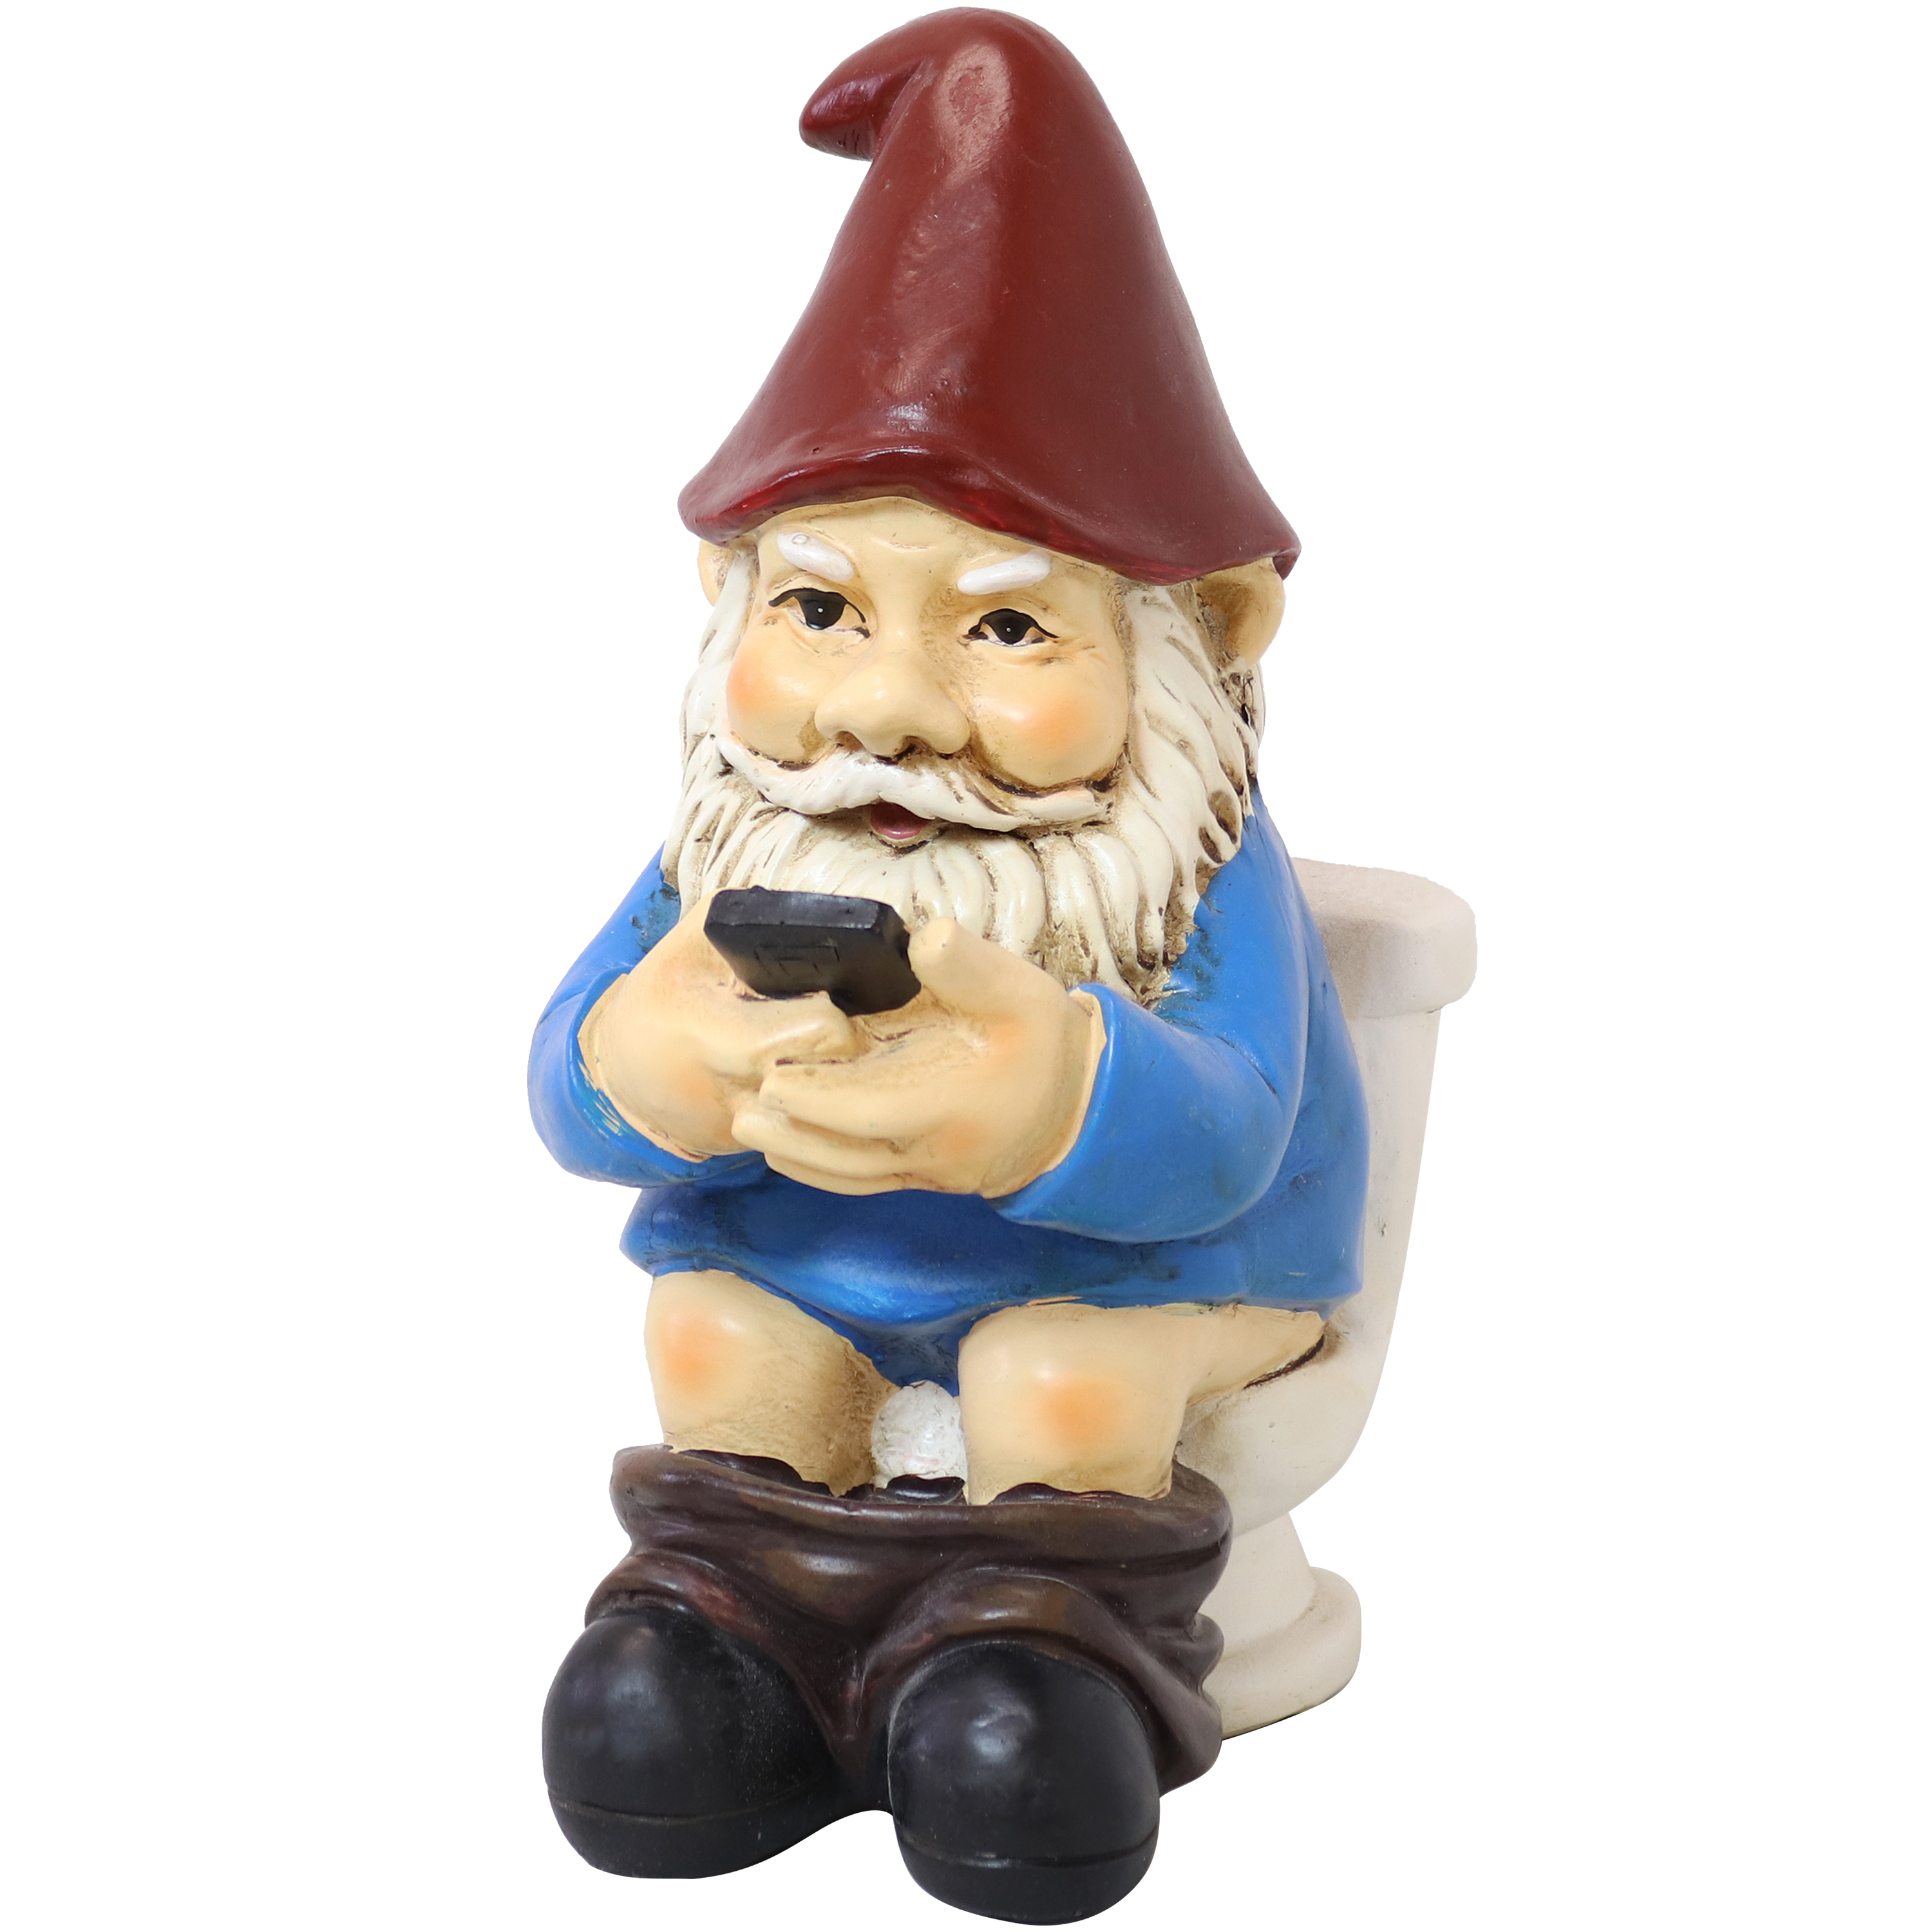 Sunnydaze Cody the Gnome Reading Phone on the Throne - 9.5-Inch